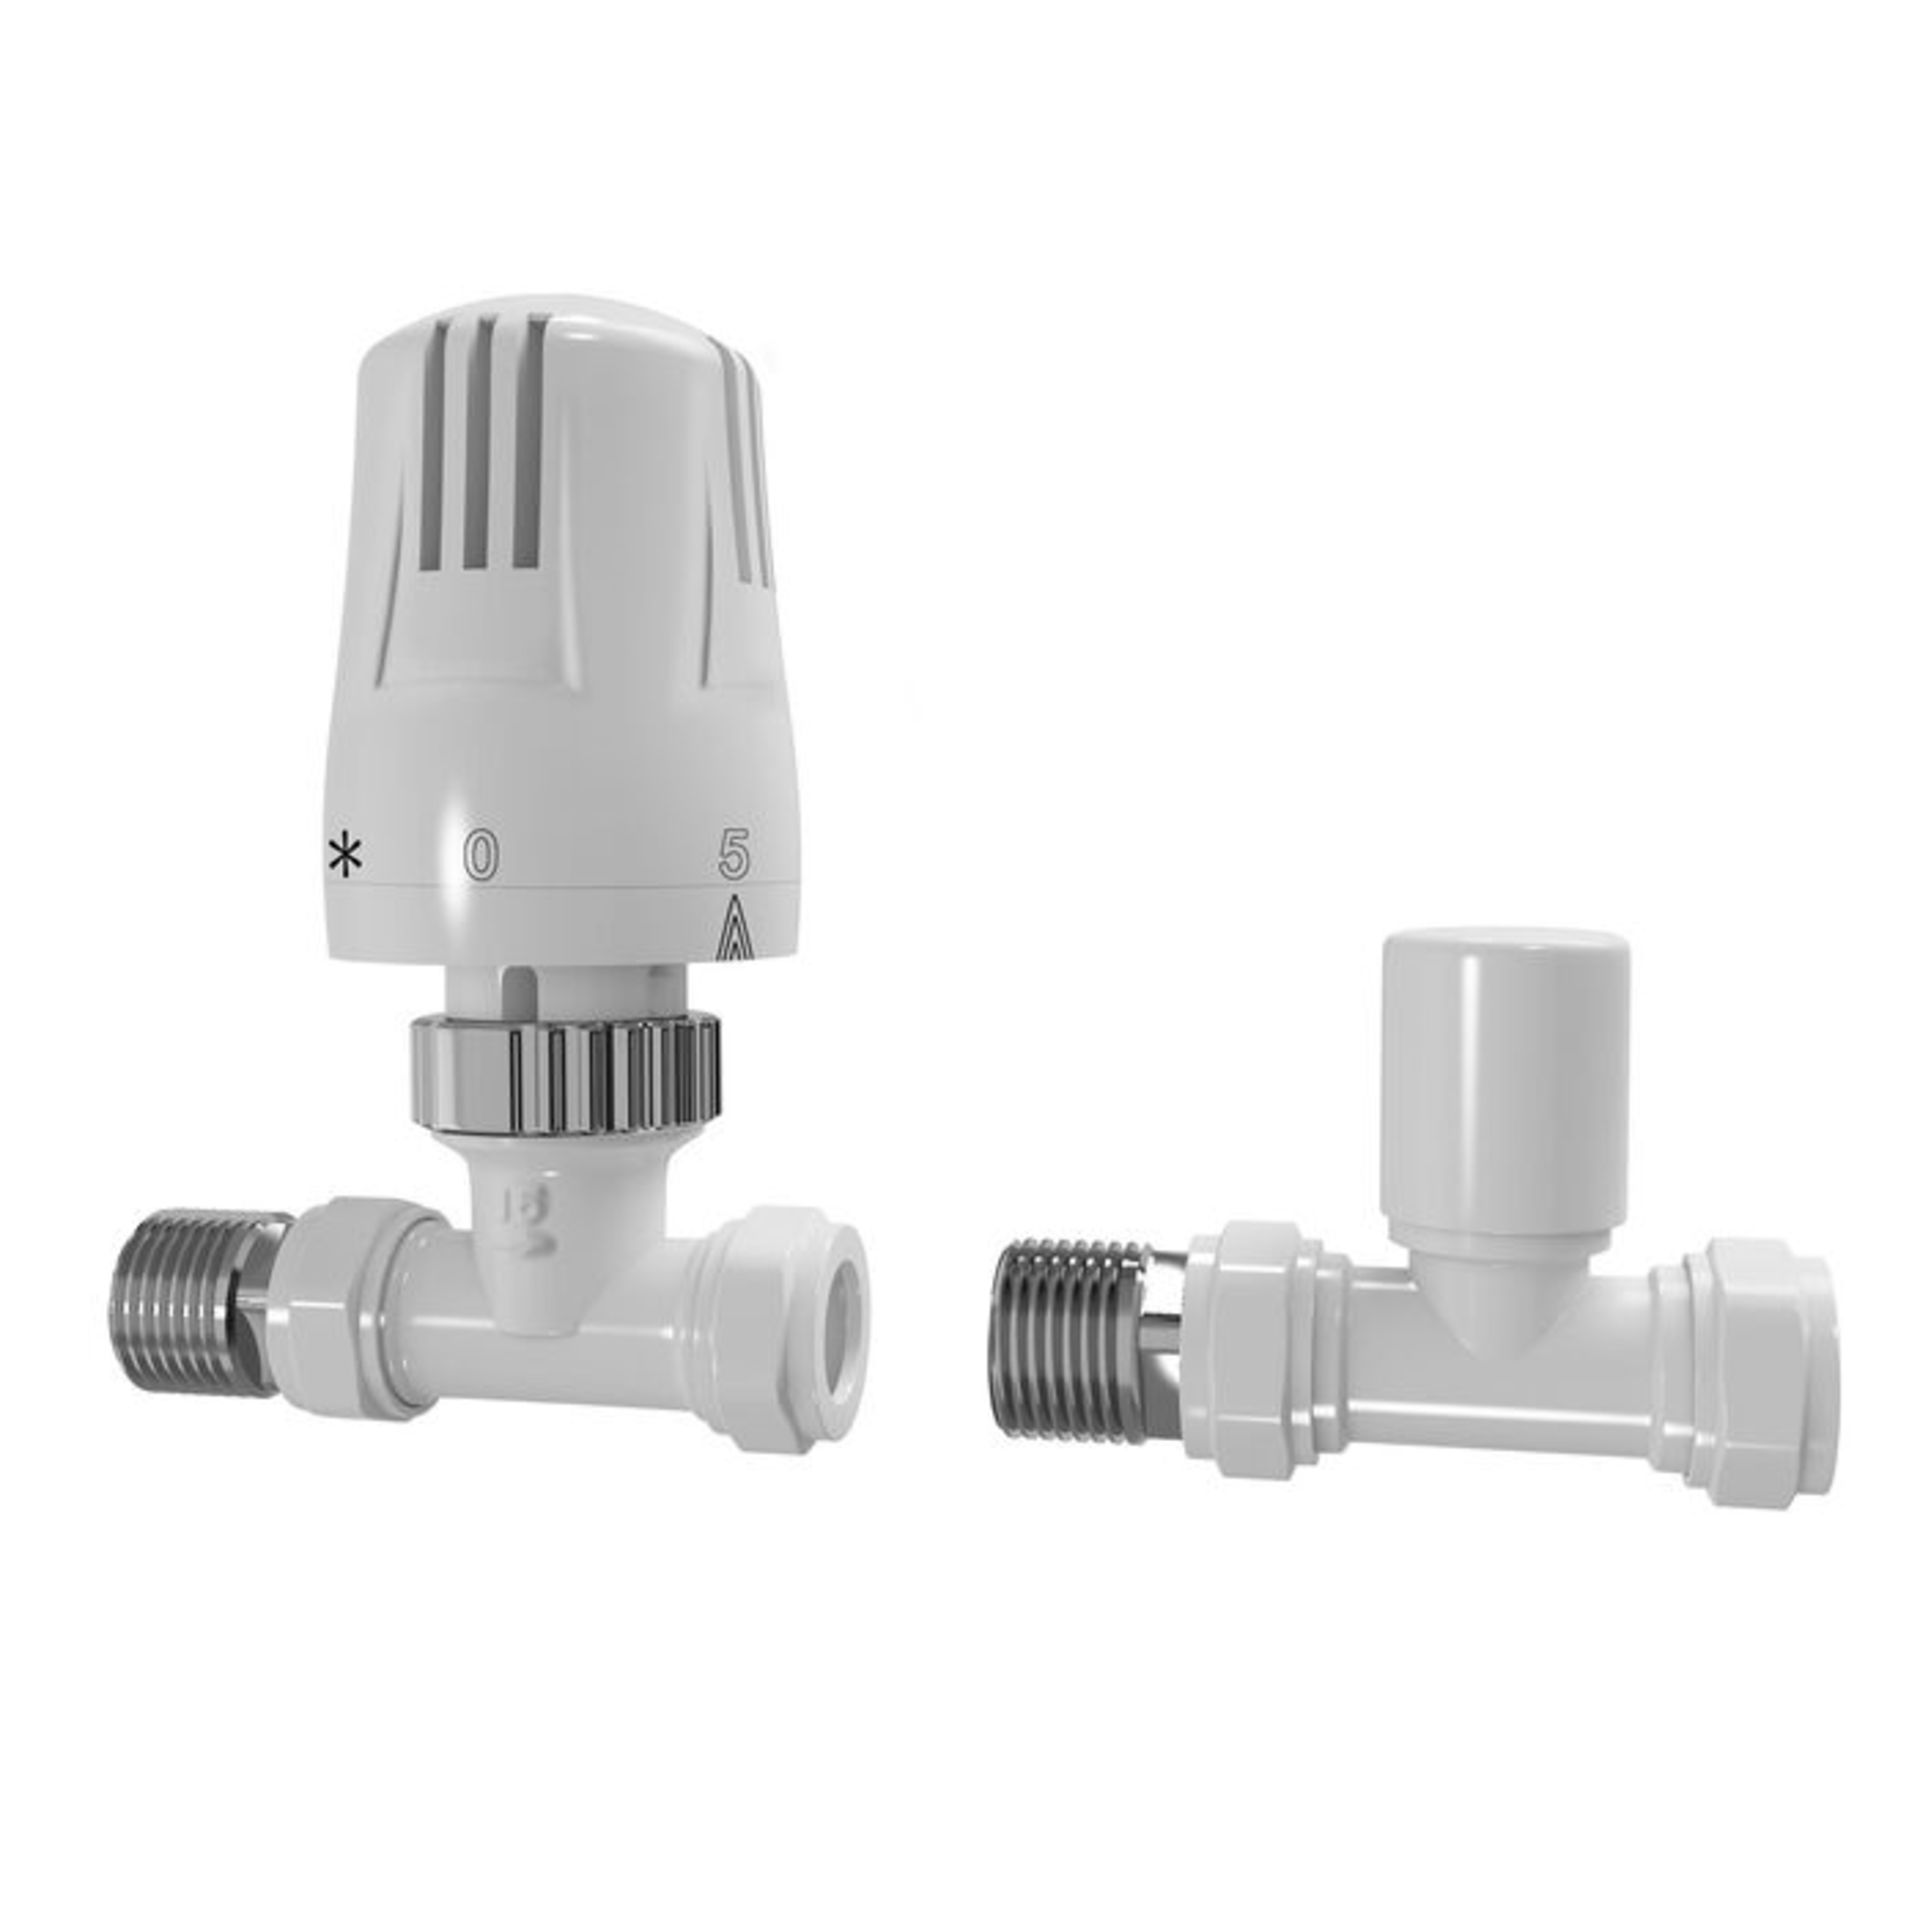 (PP1006) 15mm Standard Connection Thermostatic Straight Gloss White Radiator Valves Solid bras... - Image 3 of 3